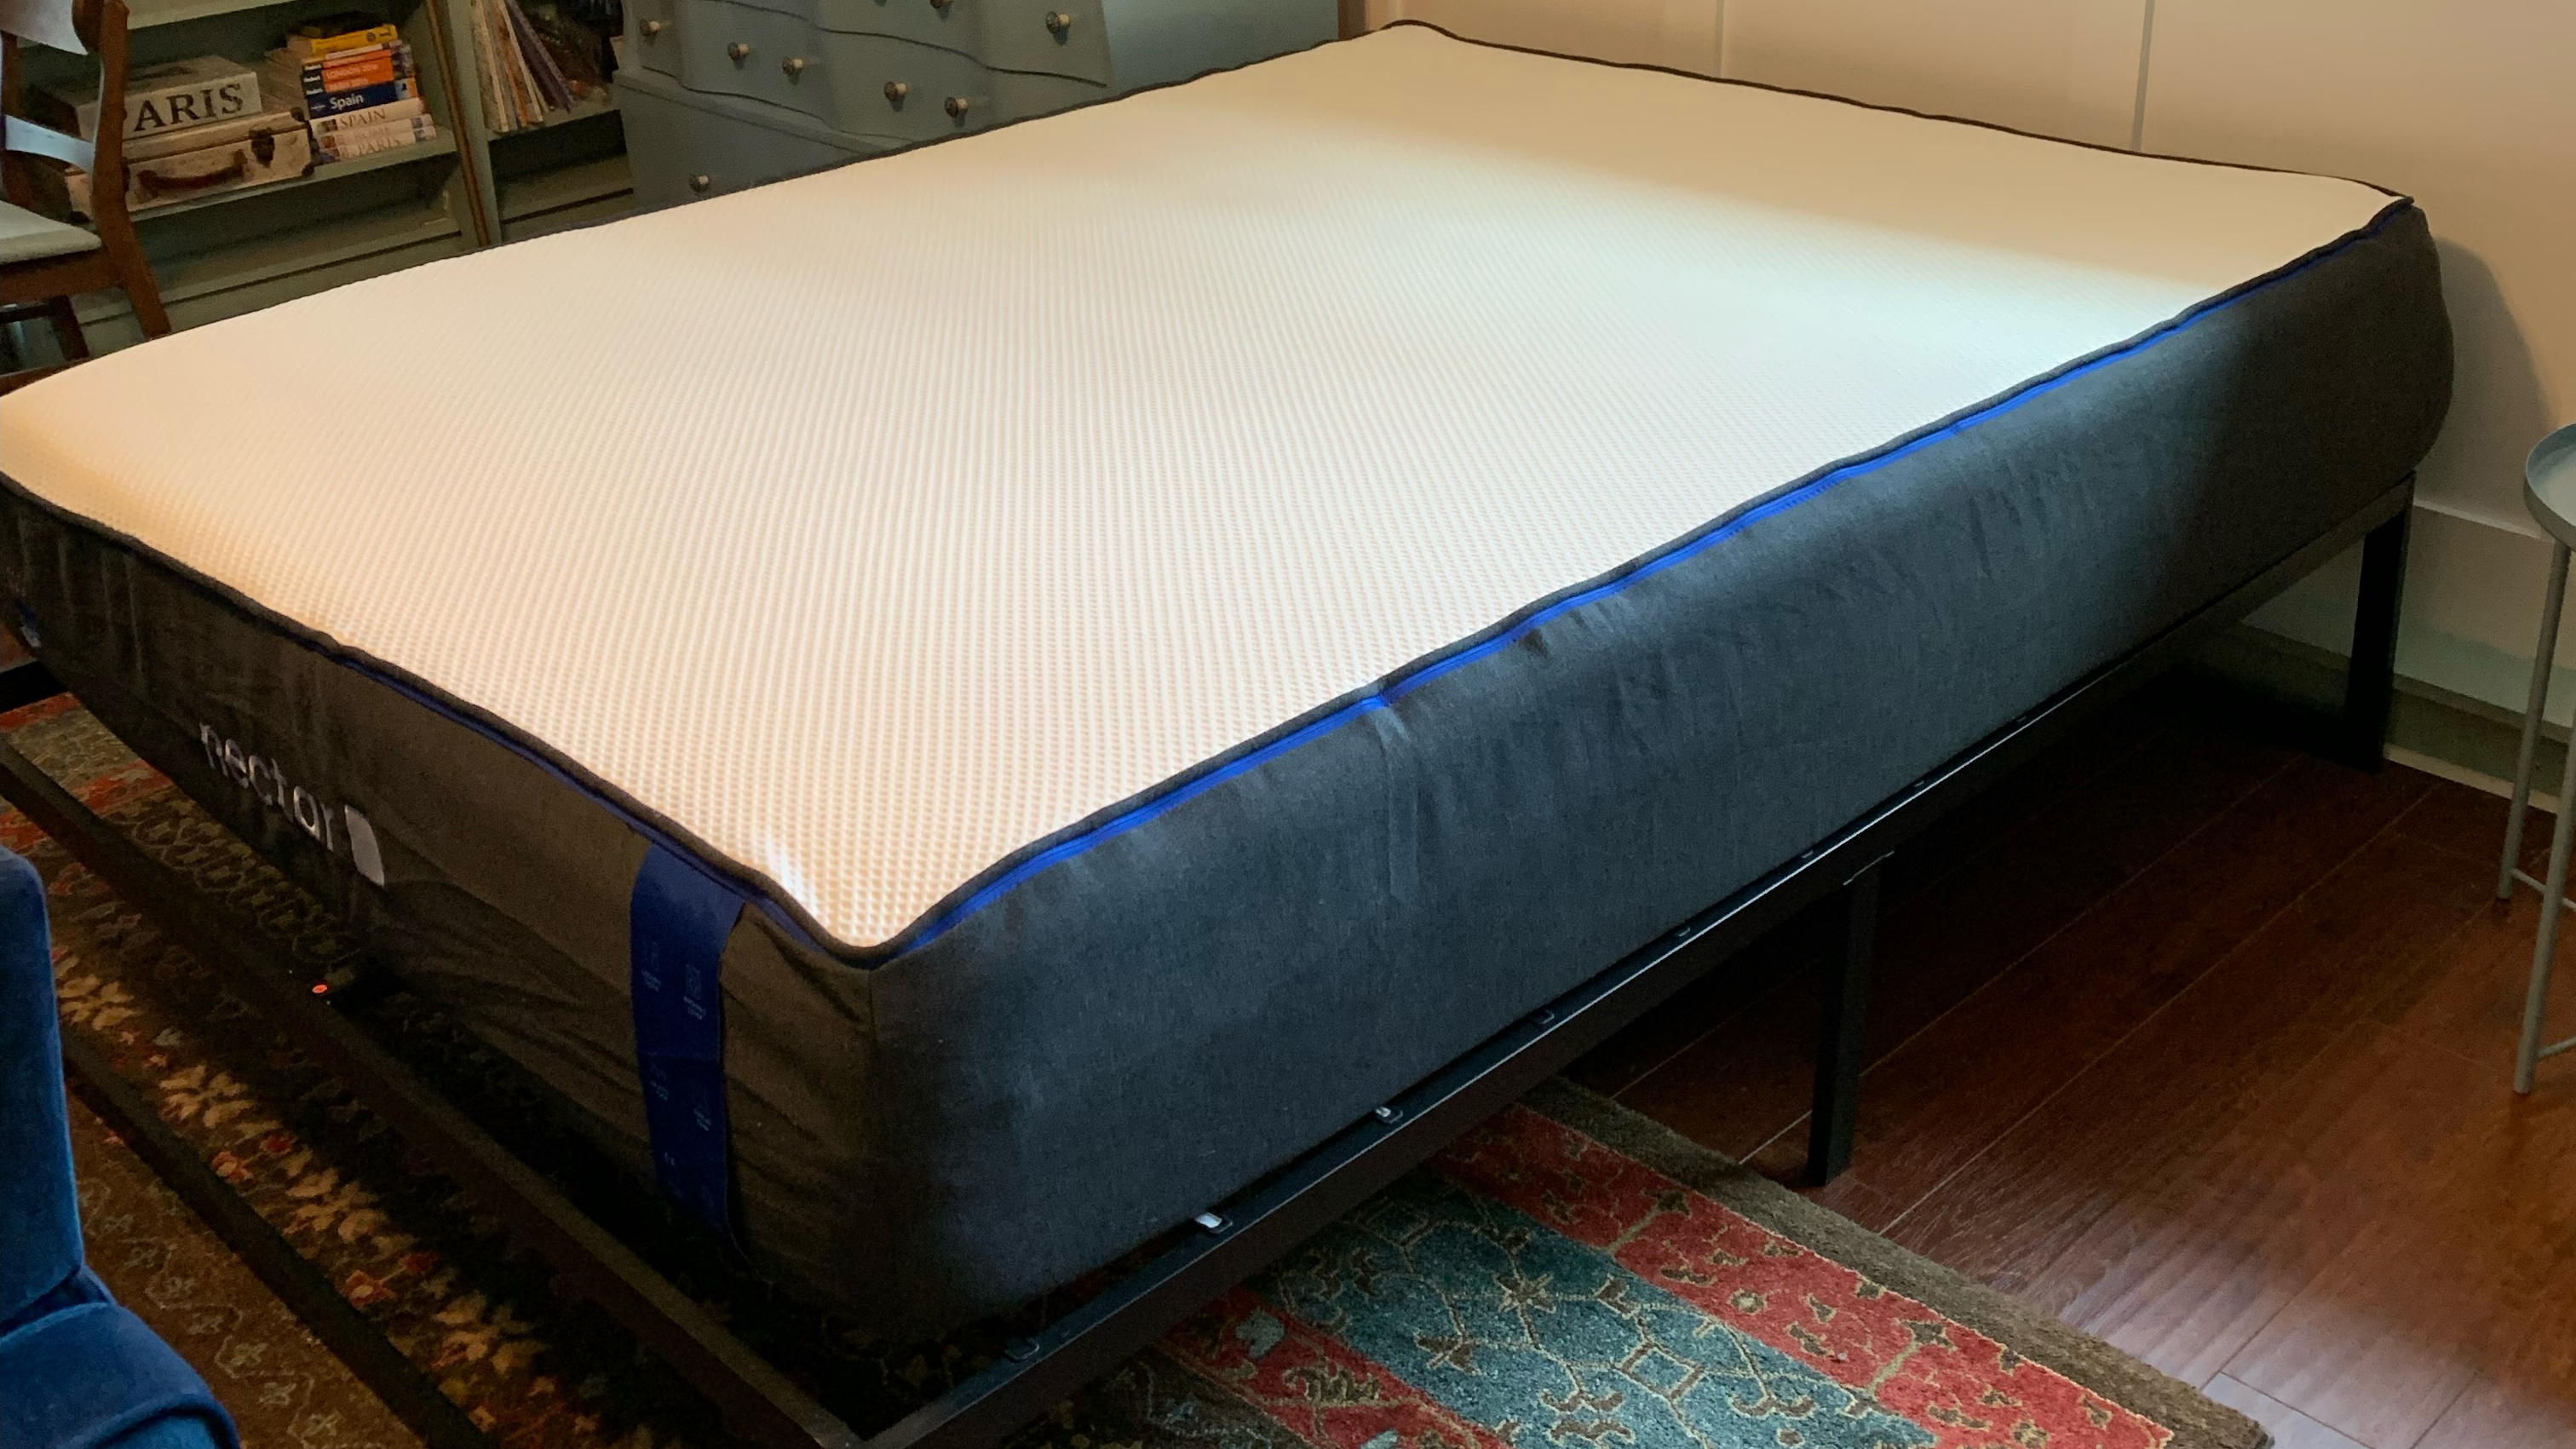 The Nectar Mattress photographed in our reviewer's bedroom during the testing process